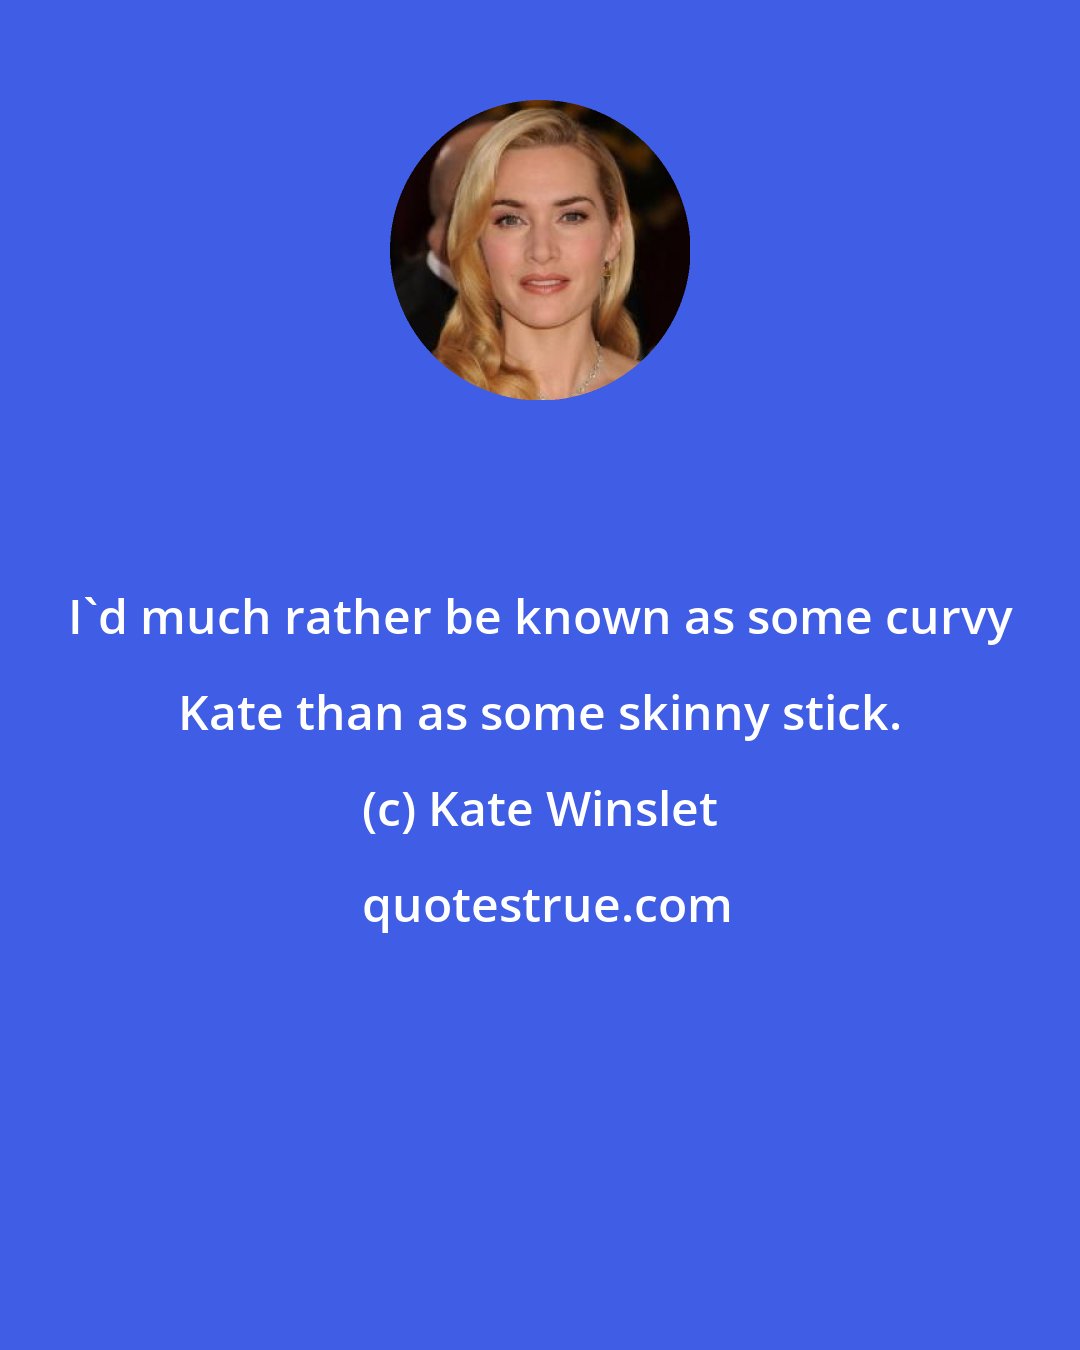 Kate Winslet: I'd much rather be known as some curvy Kate than as some skinny stick.